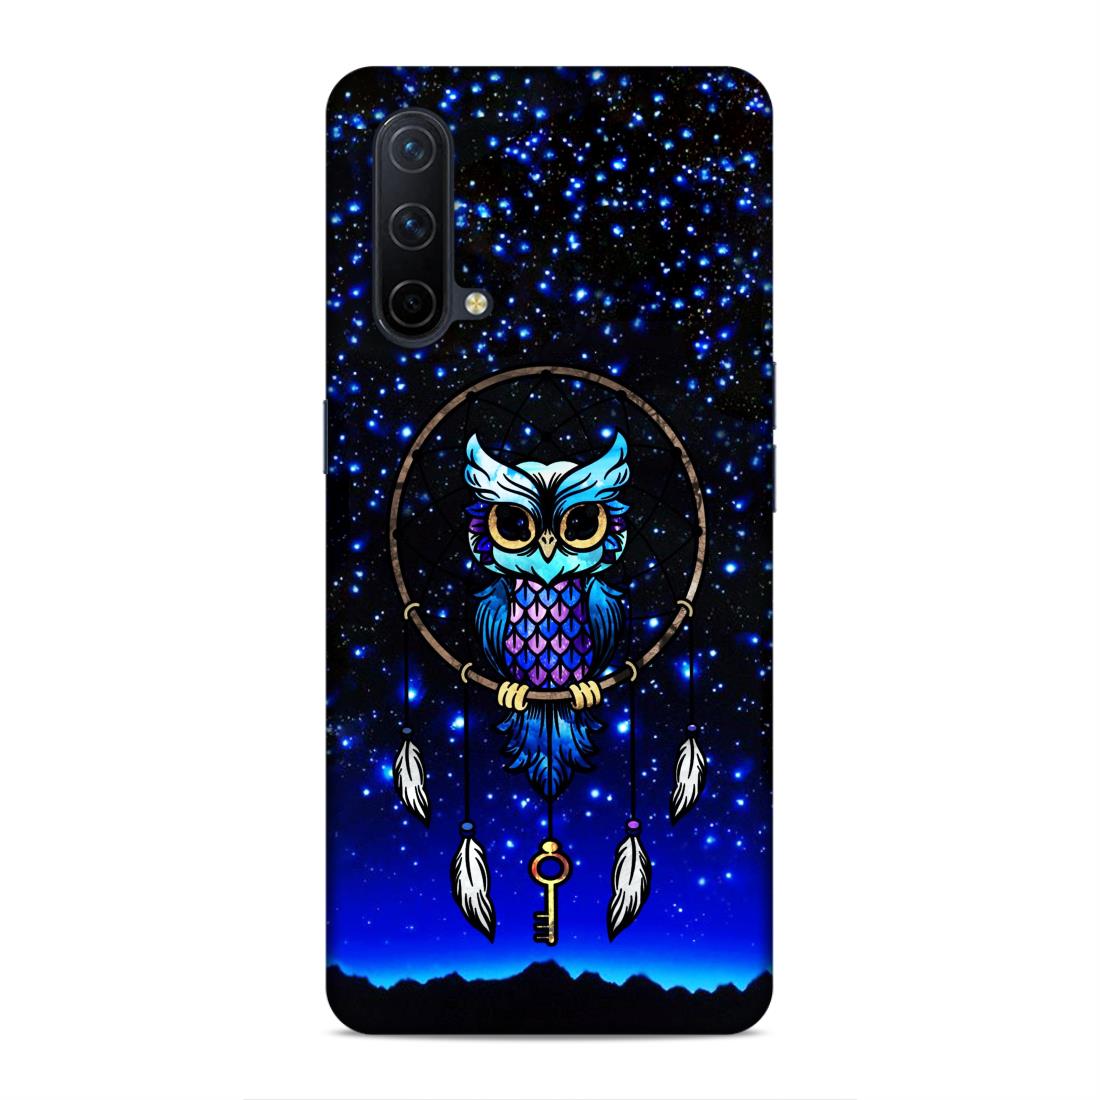 Dreamcatcher Owl Hard Back Case For OnePlus Nord CE 5G